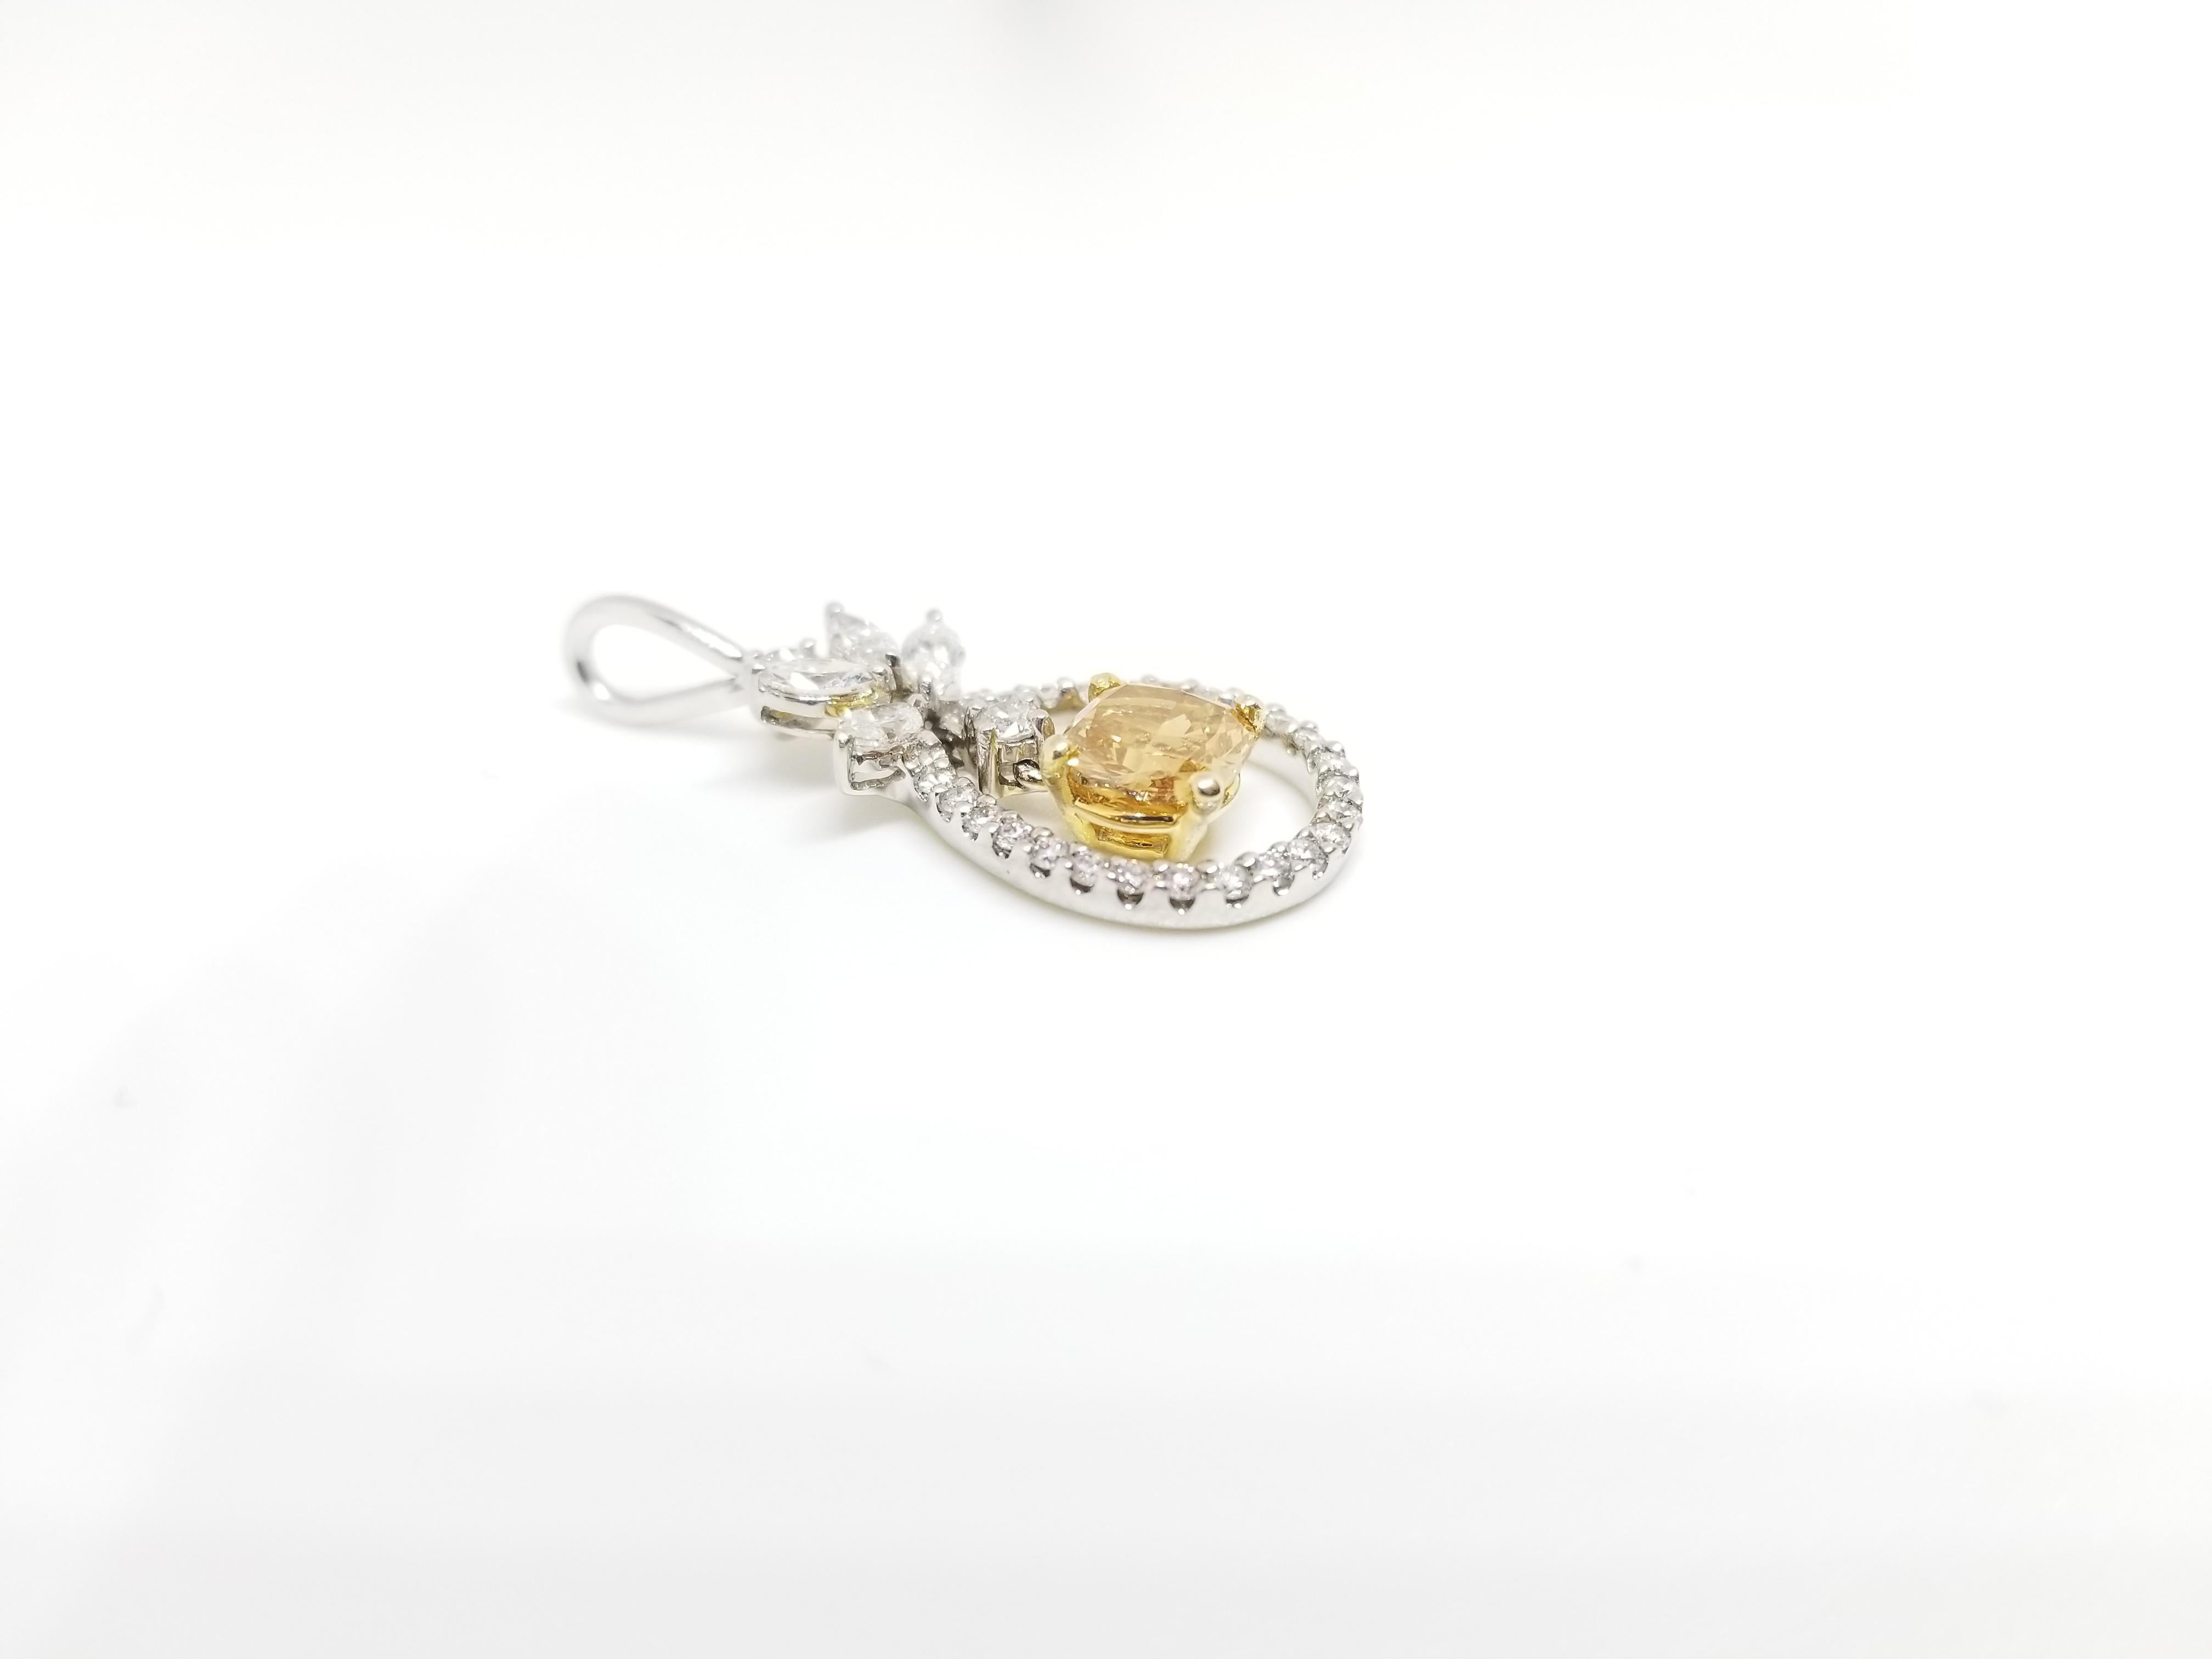 Gorgeous fancy deep orange-yellow color cushion cut diamond pendant, unique color combination cushion weighing 0.80 ct GIA, surround by mixed white marquise and round brilliant cut diamonds. set in 14k white gold. pendant measures approximately 1